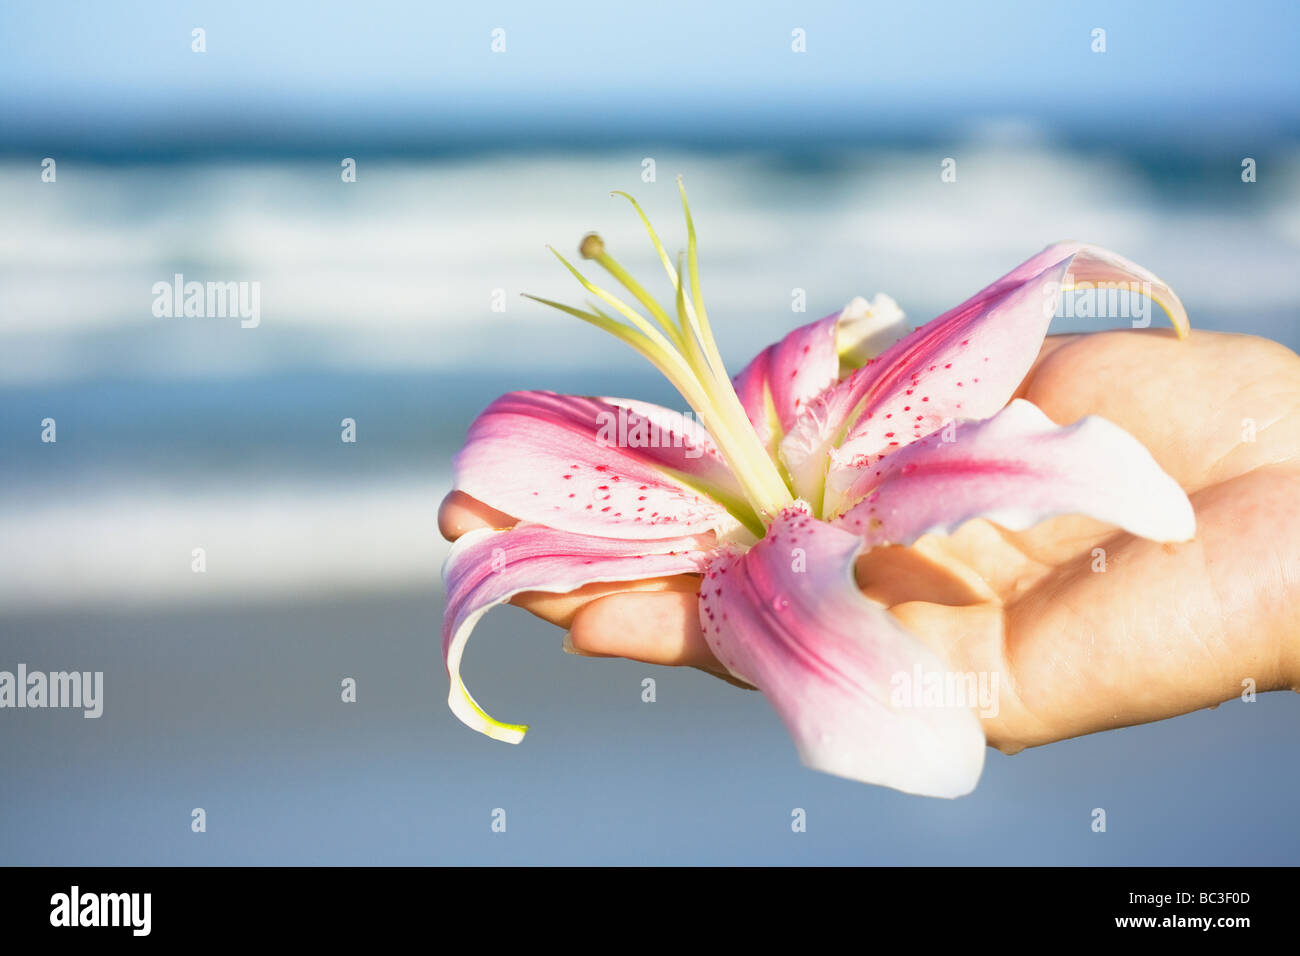 Lily flower in human hand on blue sea background Stock Photo